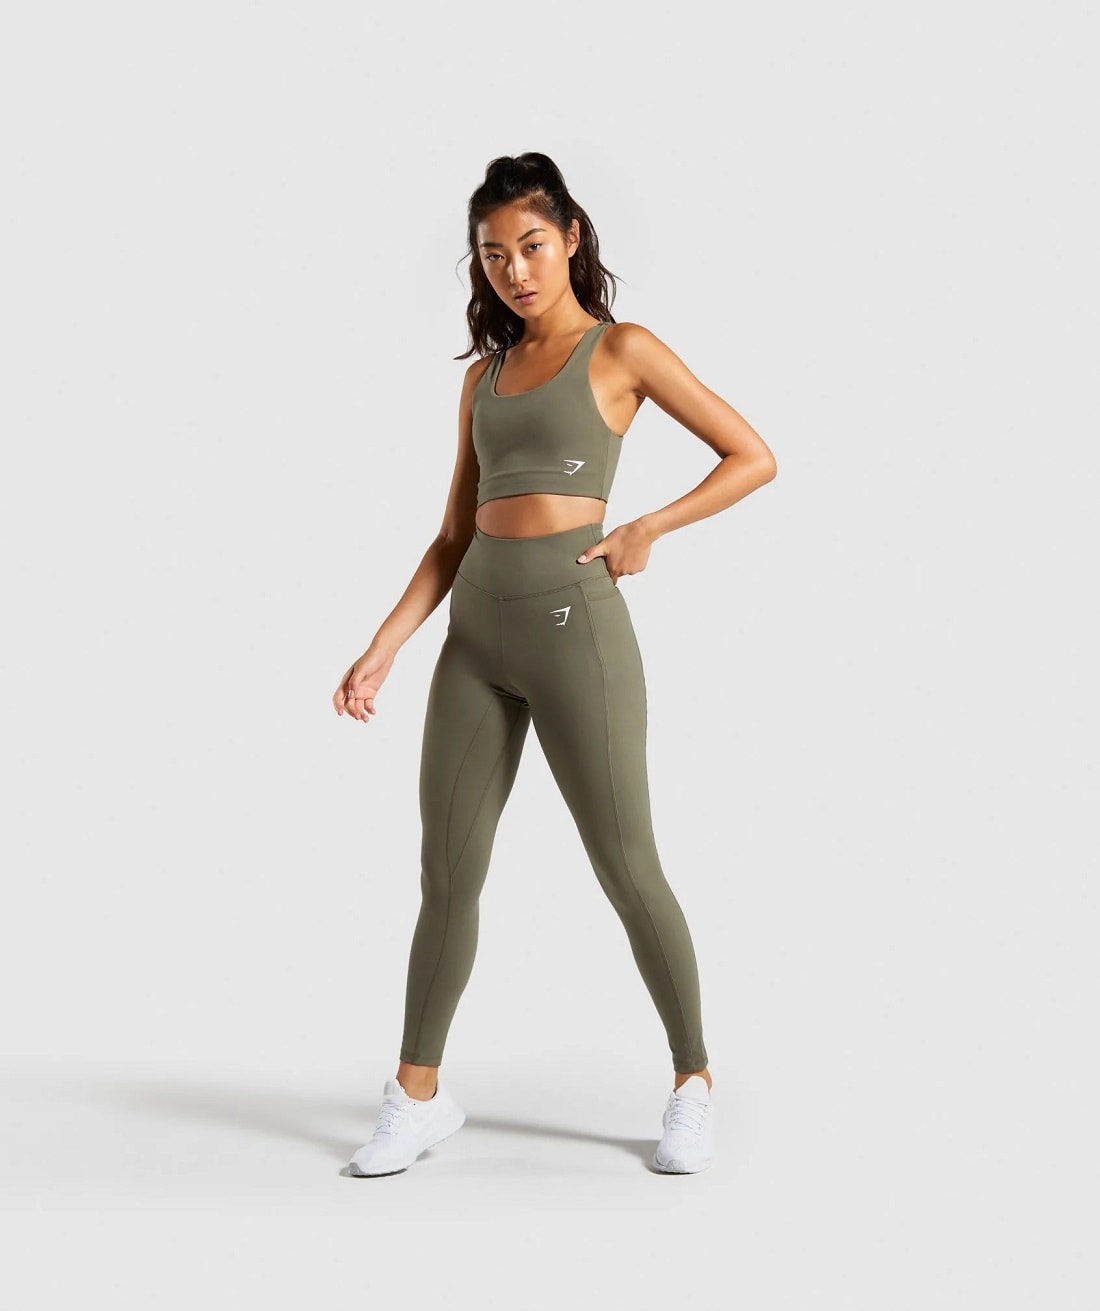 Are These the 7 Best Gymshark Leggings for Your Butt and Workout?